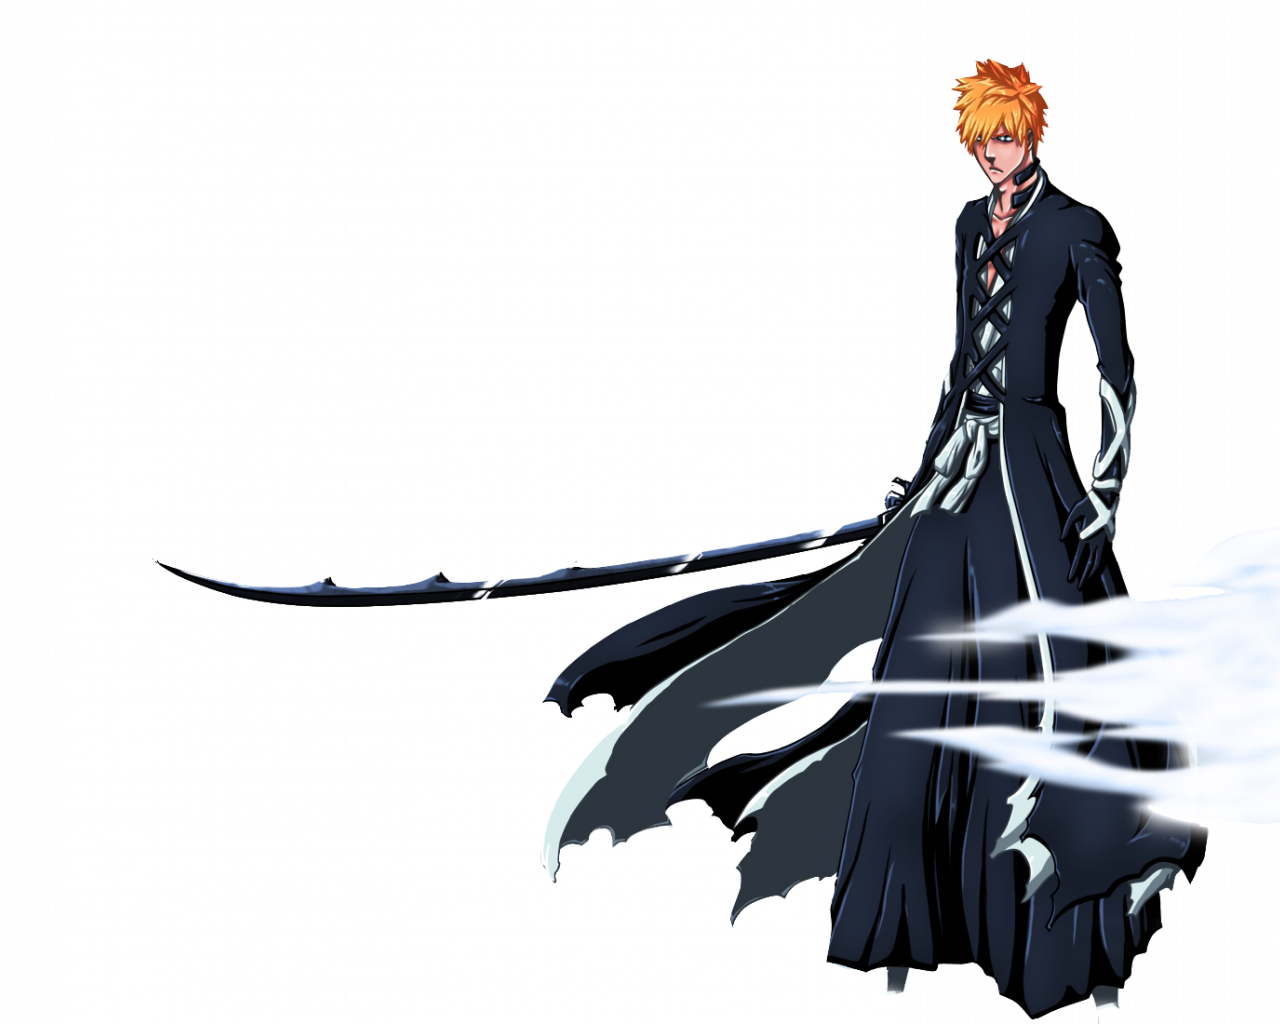 Download Anime Bleach Download HD HQ PNG Image